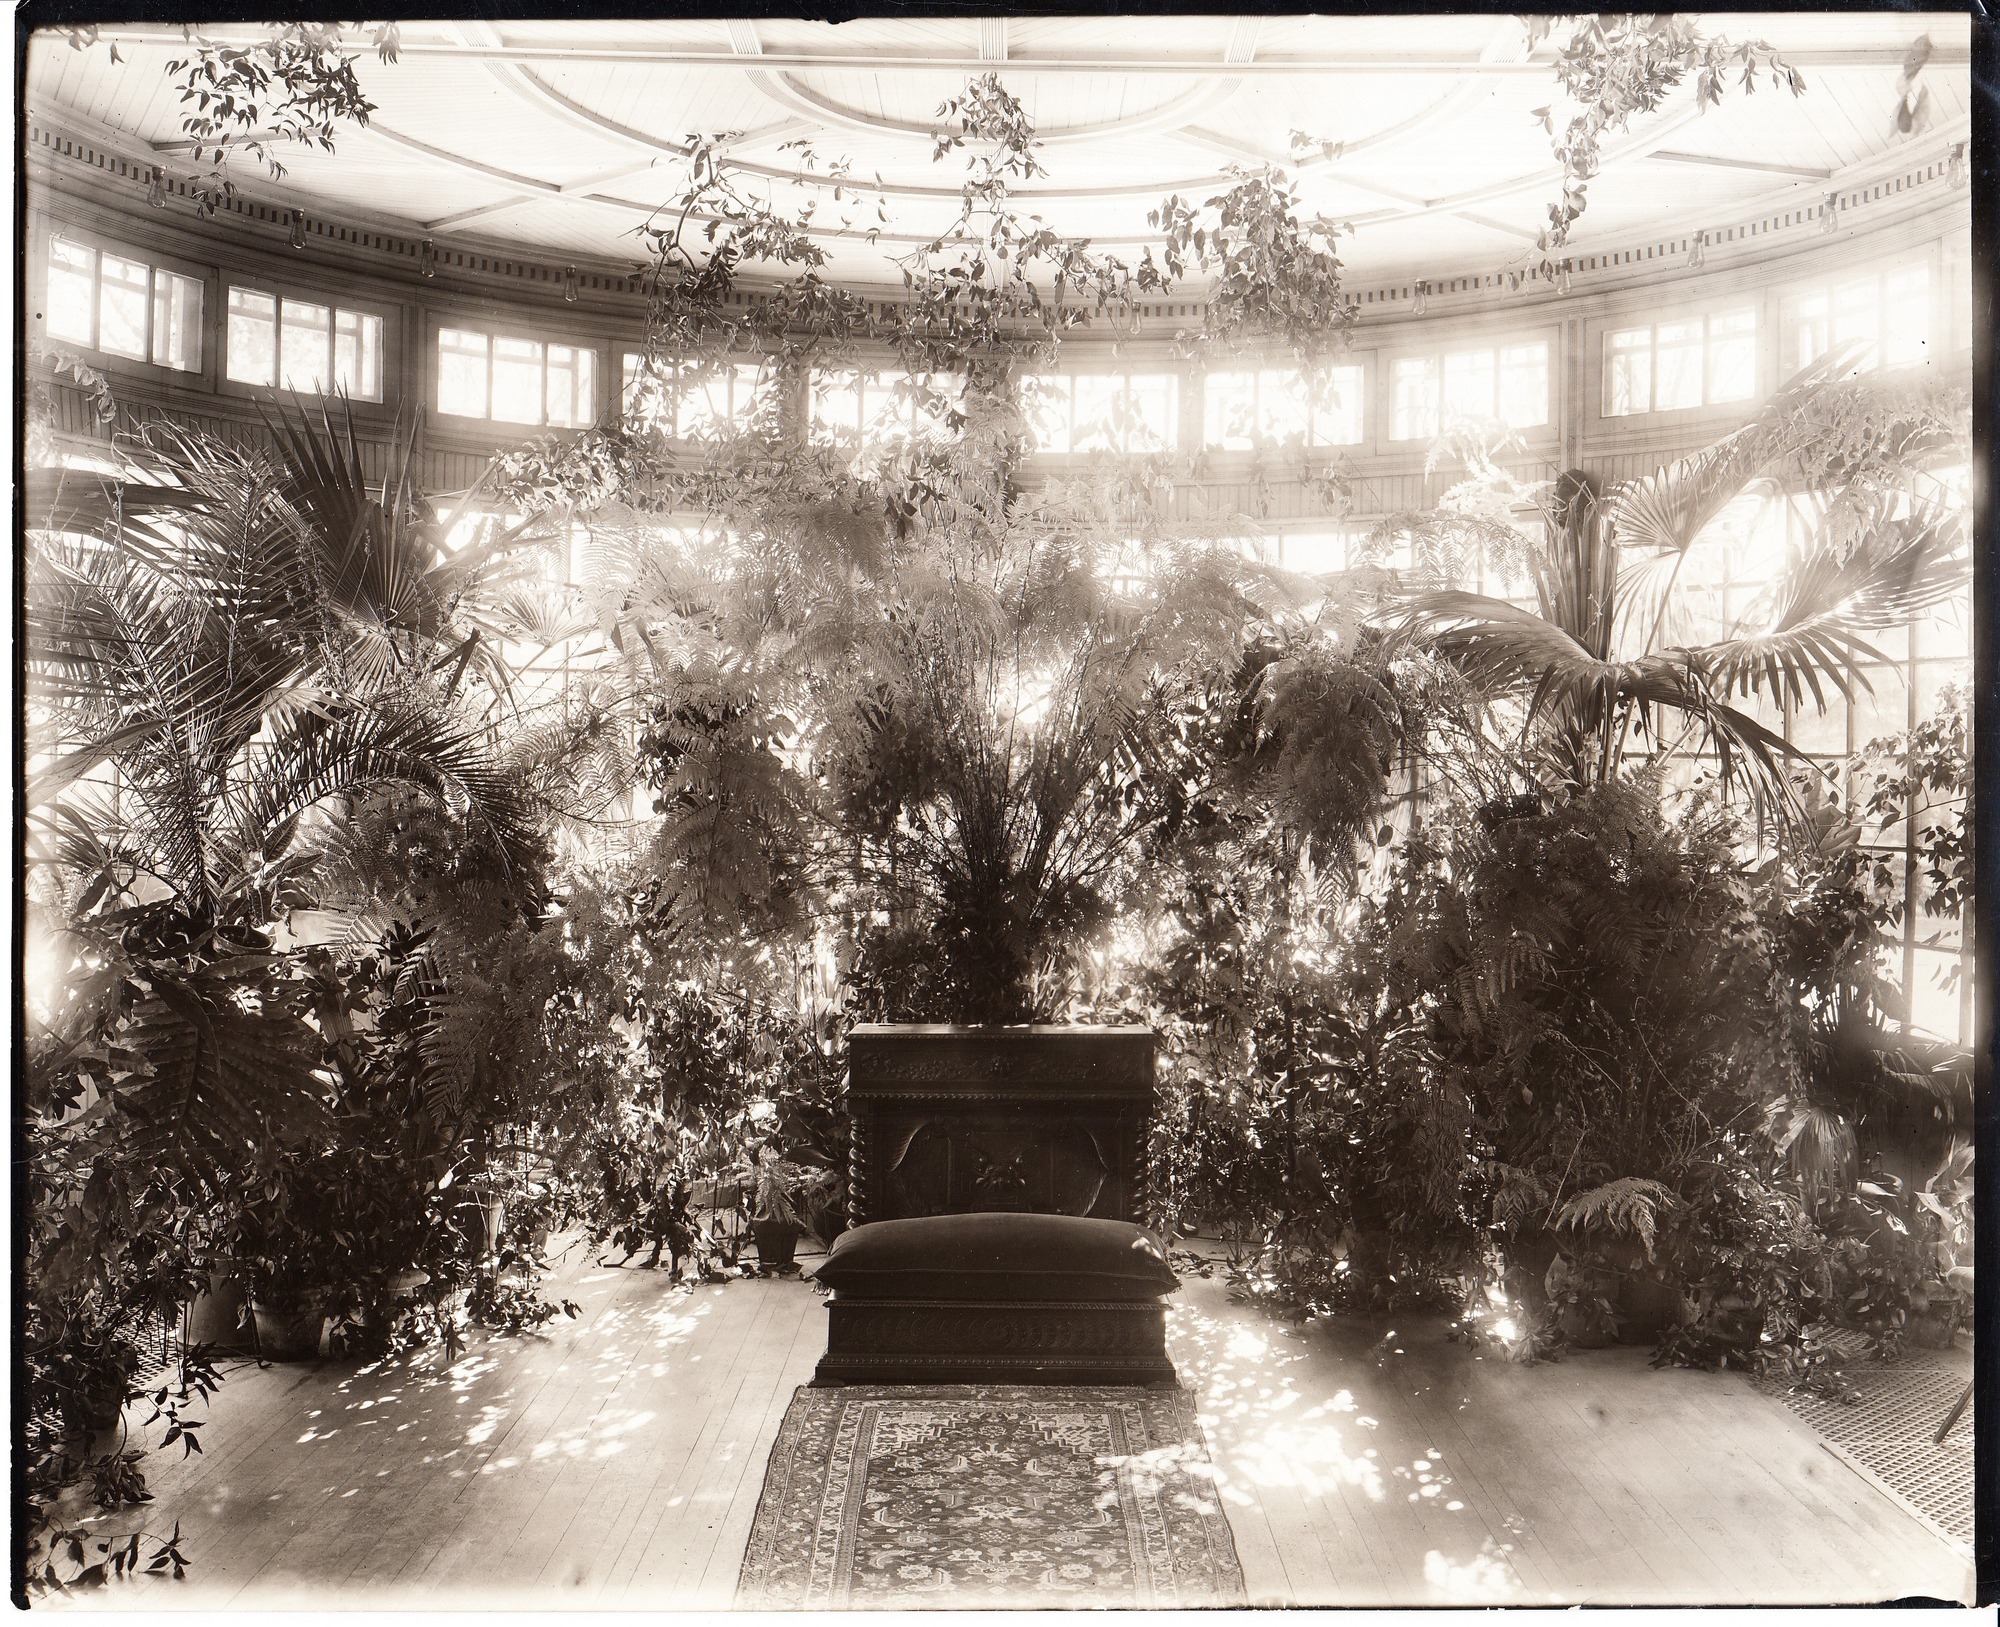 Glenmont, interior, first floor, conservatory, prie-dieu in place for wedding of Grace Miller, sister of Mina Edison.